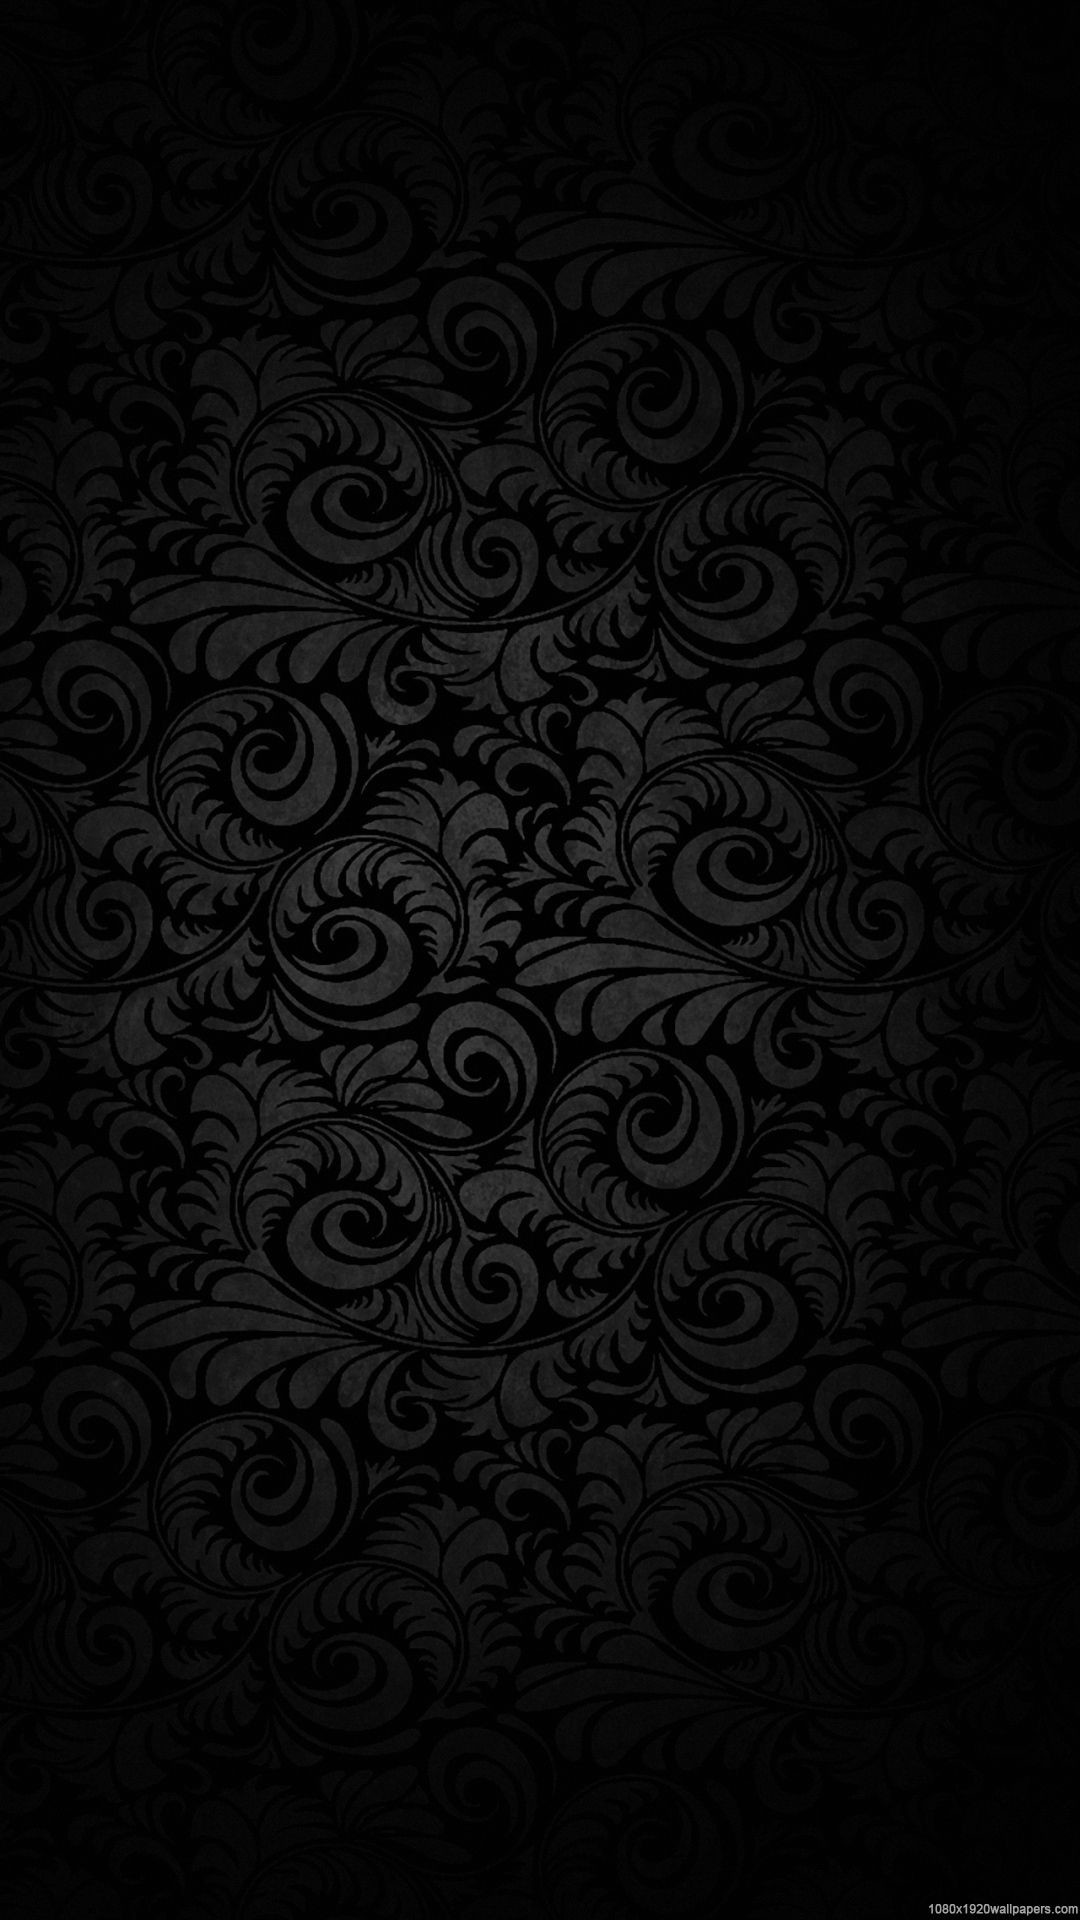 Black Background Hd Wallpaper For Mobile - Find your perfect background